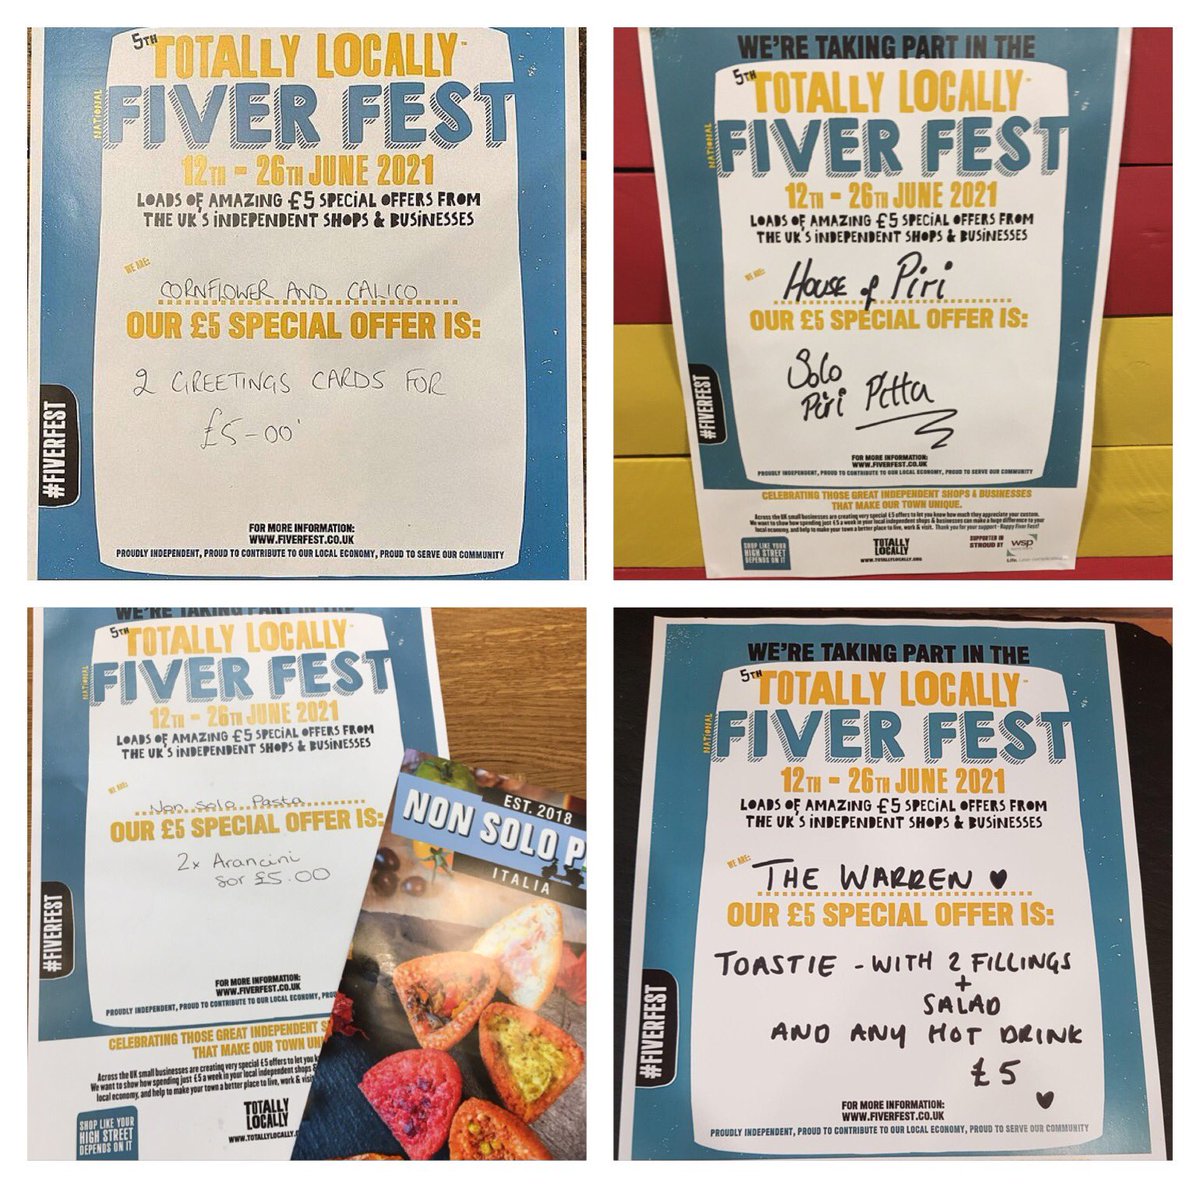 The Stroud Fiver Fest posters are starting to appear across town!!! 💛
The full list is due to be released tonight on VisitStroud.uk/FiverFest 
Excited? Yep! It all starts tomorrow!!!
#FiverFest #StroudFiverFest #Stroud @1totallylocally